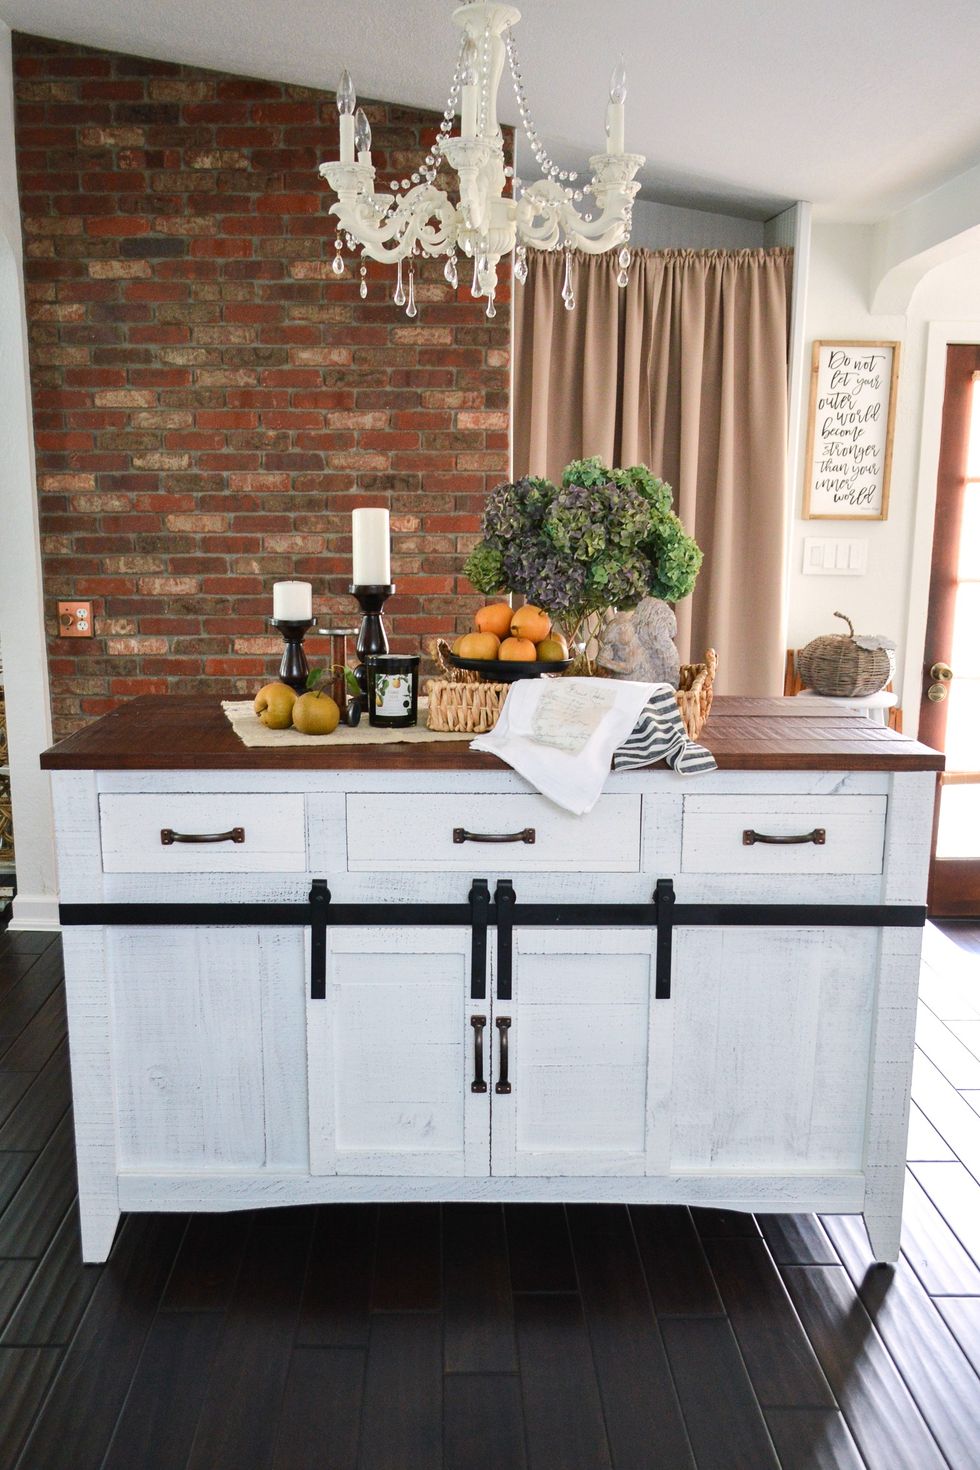 19 Small Kitchen Island Ideas For a Space That's Both Funky and